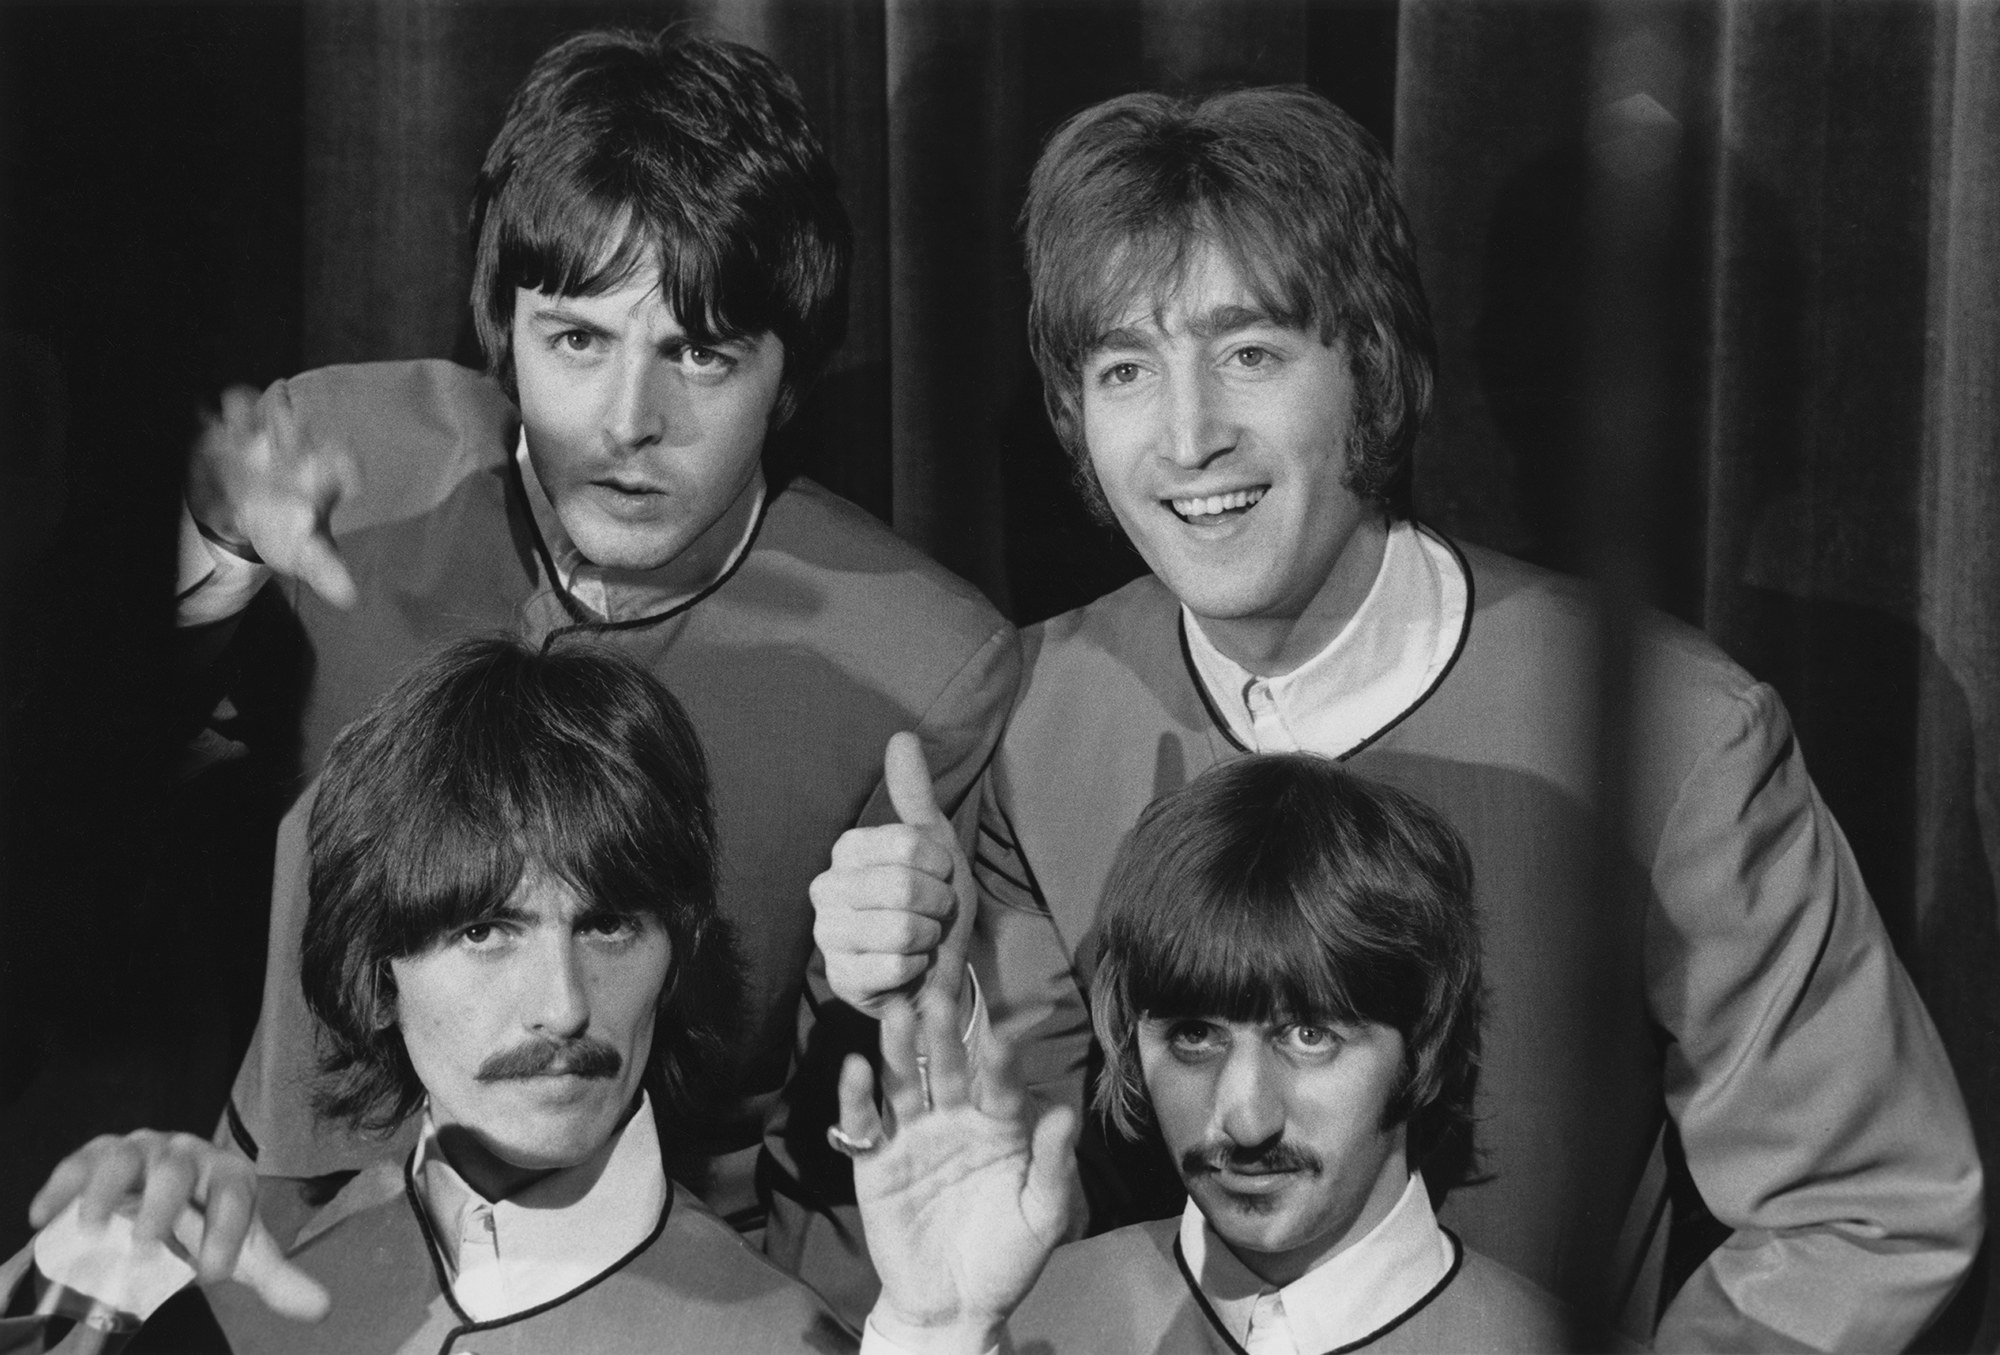 the four beatles wave and give the camera a thumbs up in matching outfits